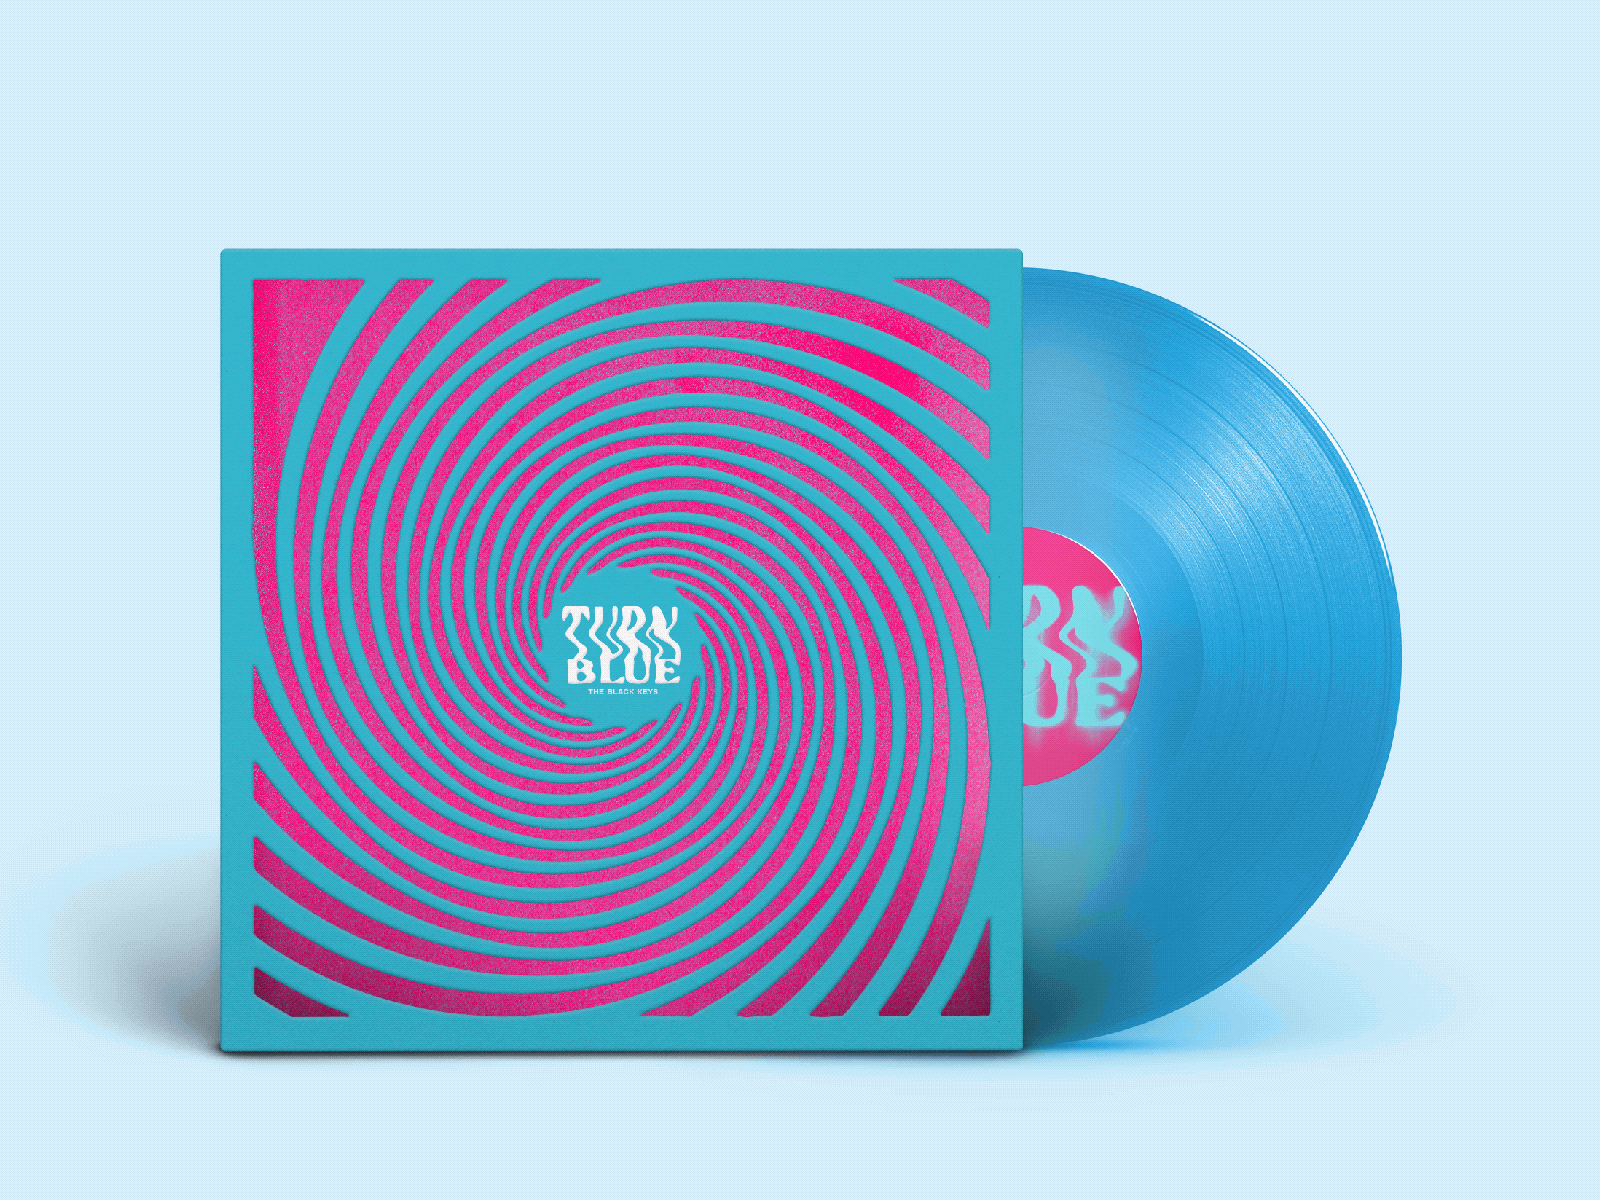 Turn Blue by The Black Keys - Remastered Discography Campaign album design campaign design discography music music design retro rock rock and roll vector vinyl